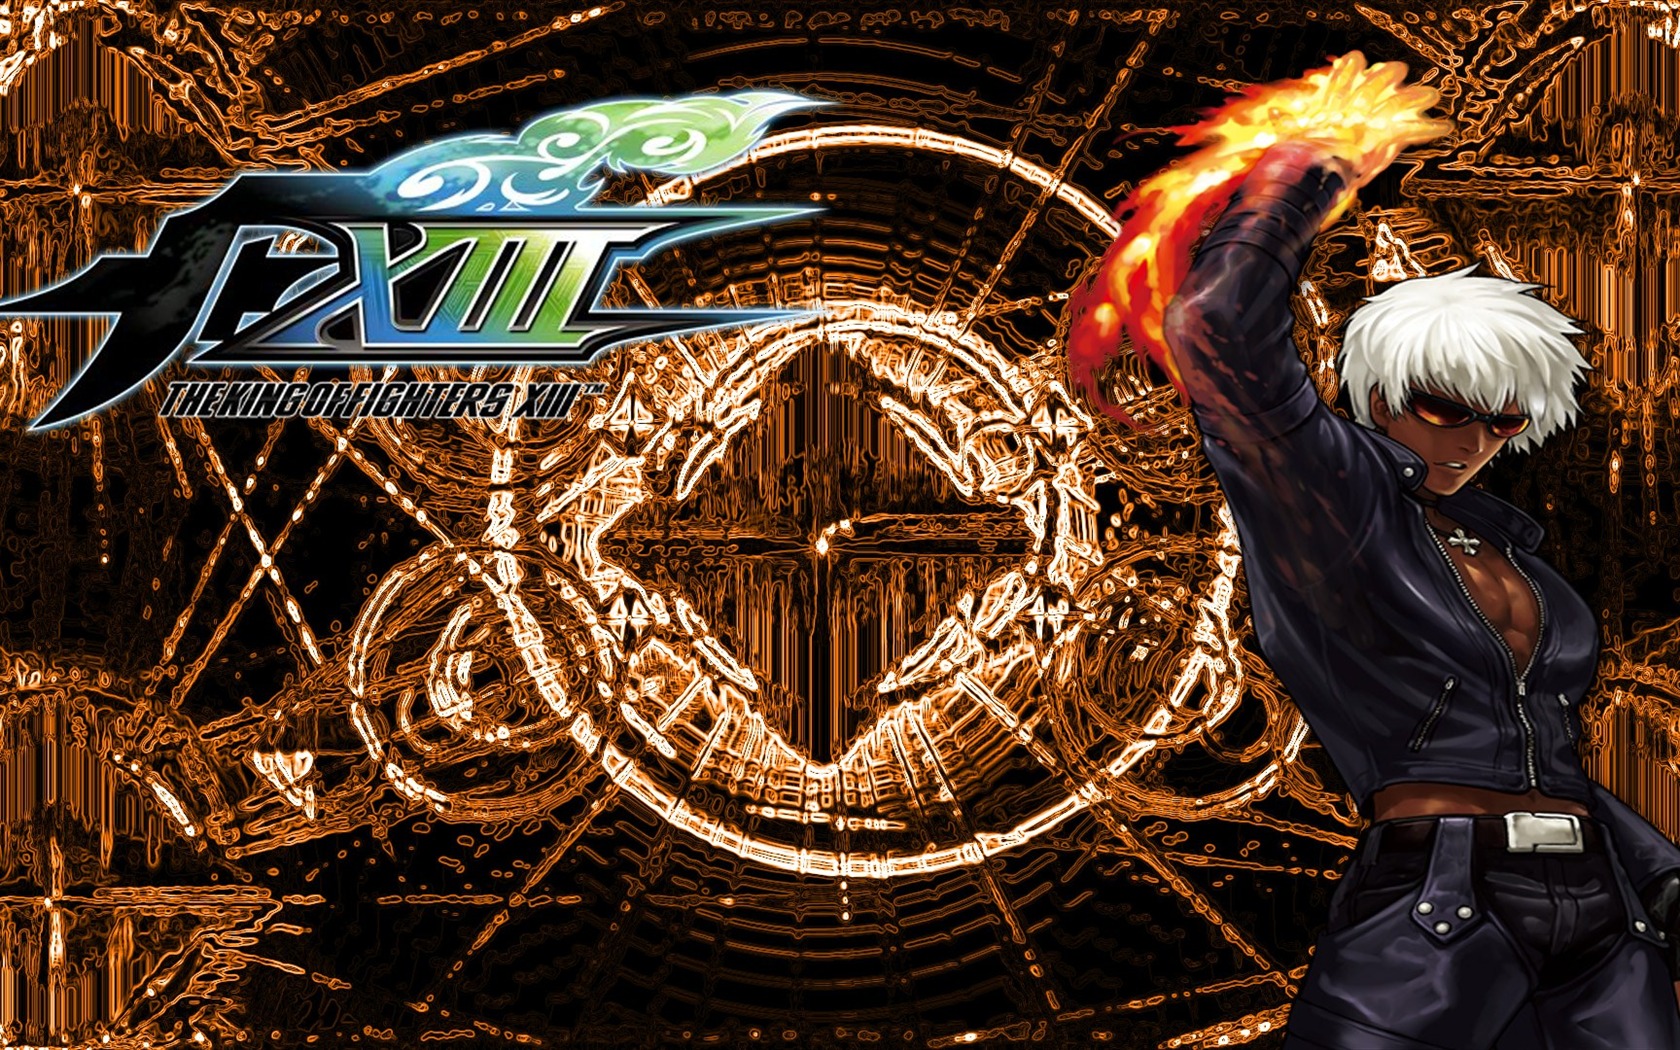 The King of Fighters XIII 拳皇13 壁纸专辑8 - 1680x1050